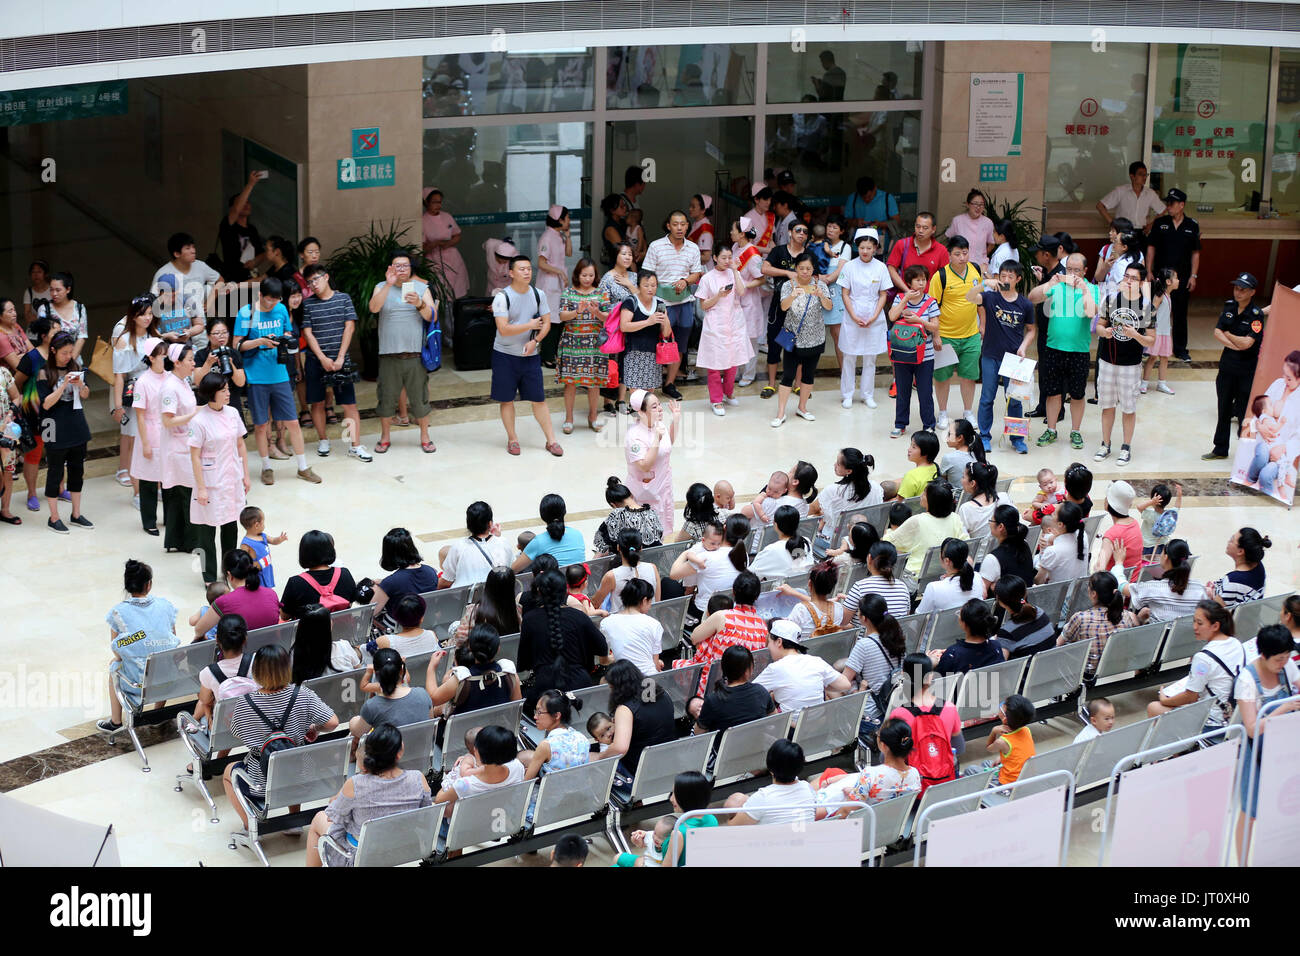 August 5, 2017 - Shenyang, Shenyang, China - Shenyang, CHINA-August 5 2017: (EDITORIAL USE ONLY. CHINA OUT) ..More than 50 women breastfeed their babies during a flash mob activity in Shenyang, northeast China's Liaoning Province, promoting breastfeeding during the World Breastfeeding Week. (Credit Image: © SIPA Asia via ZUMA Wire) Stock Photo